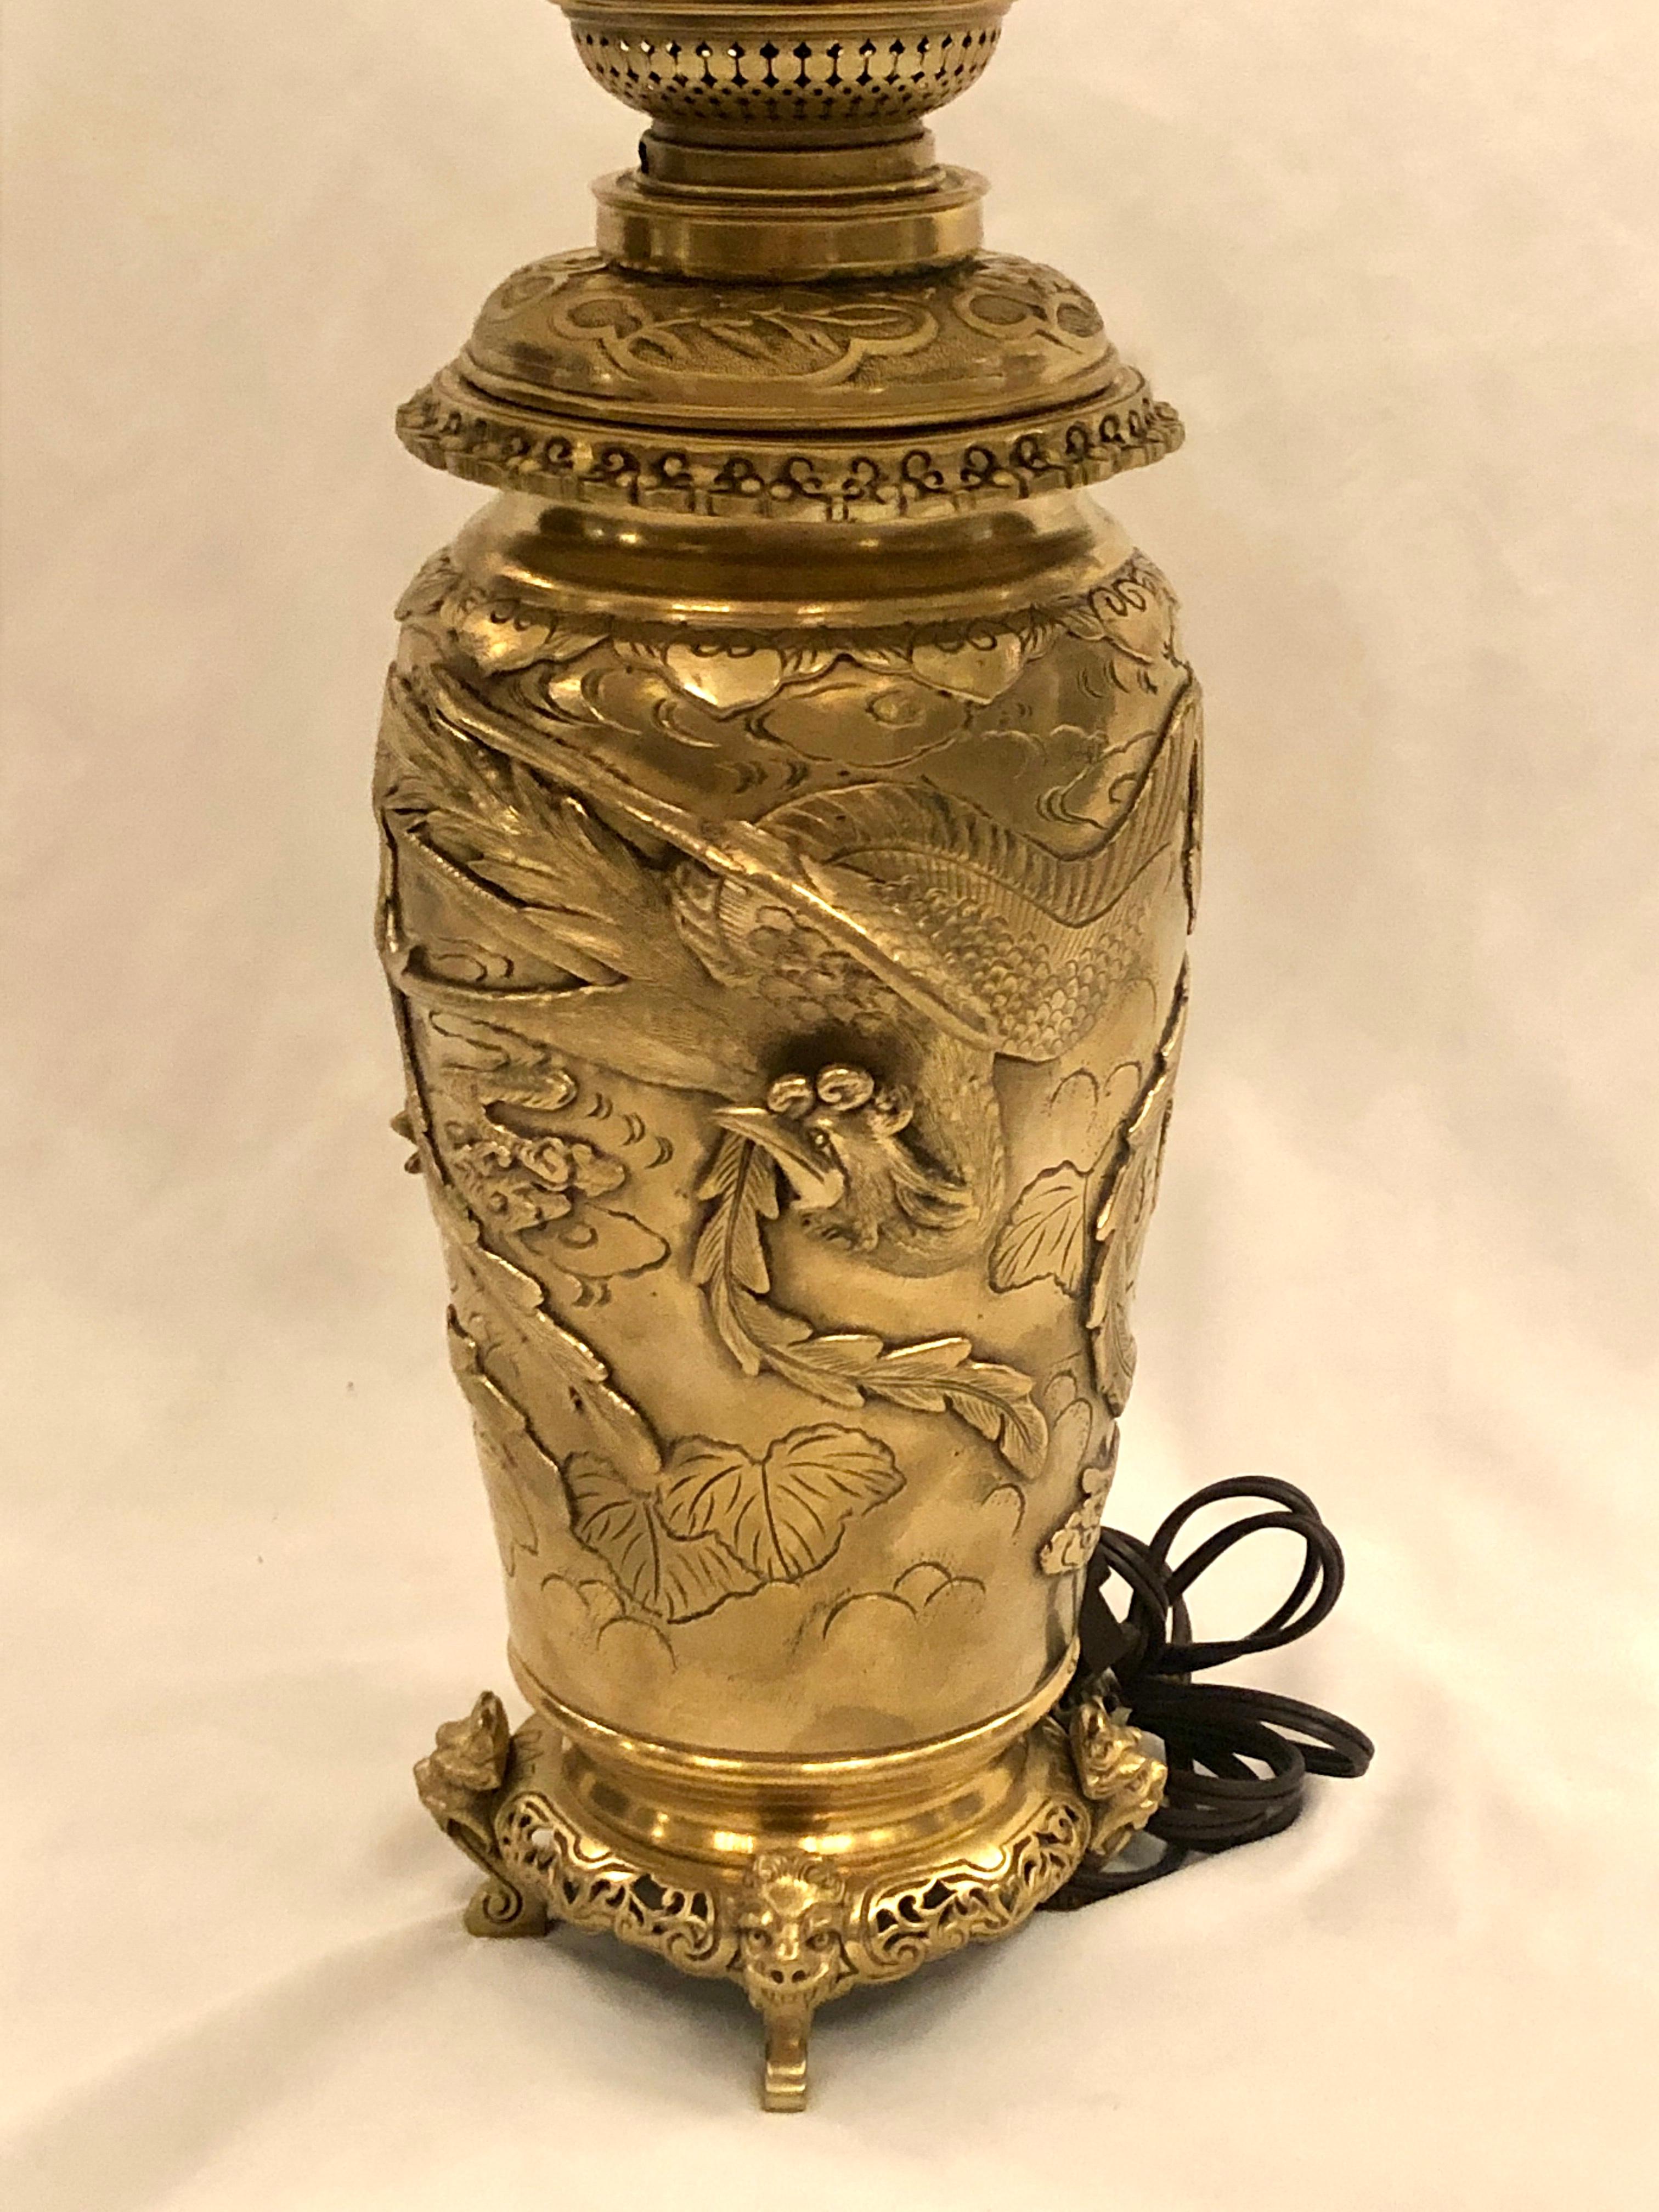 Antique 19th century Japanese gold bronze whale oil lamp (Now Electrified).
Shade shown is 18